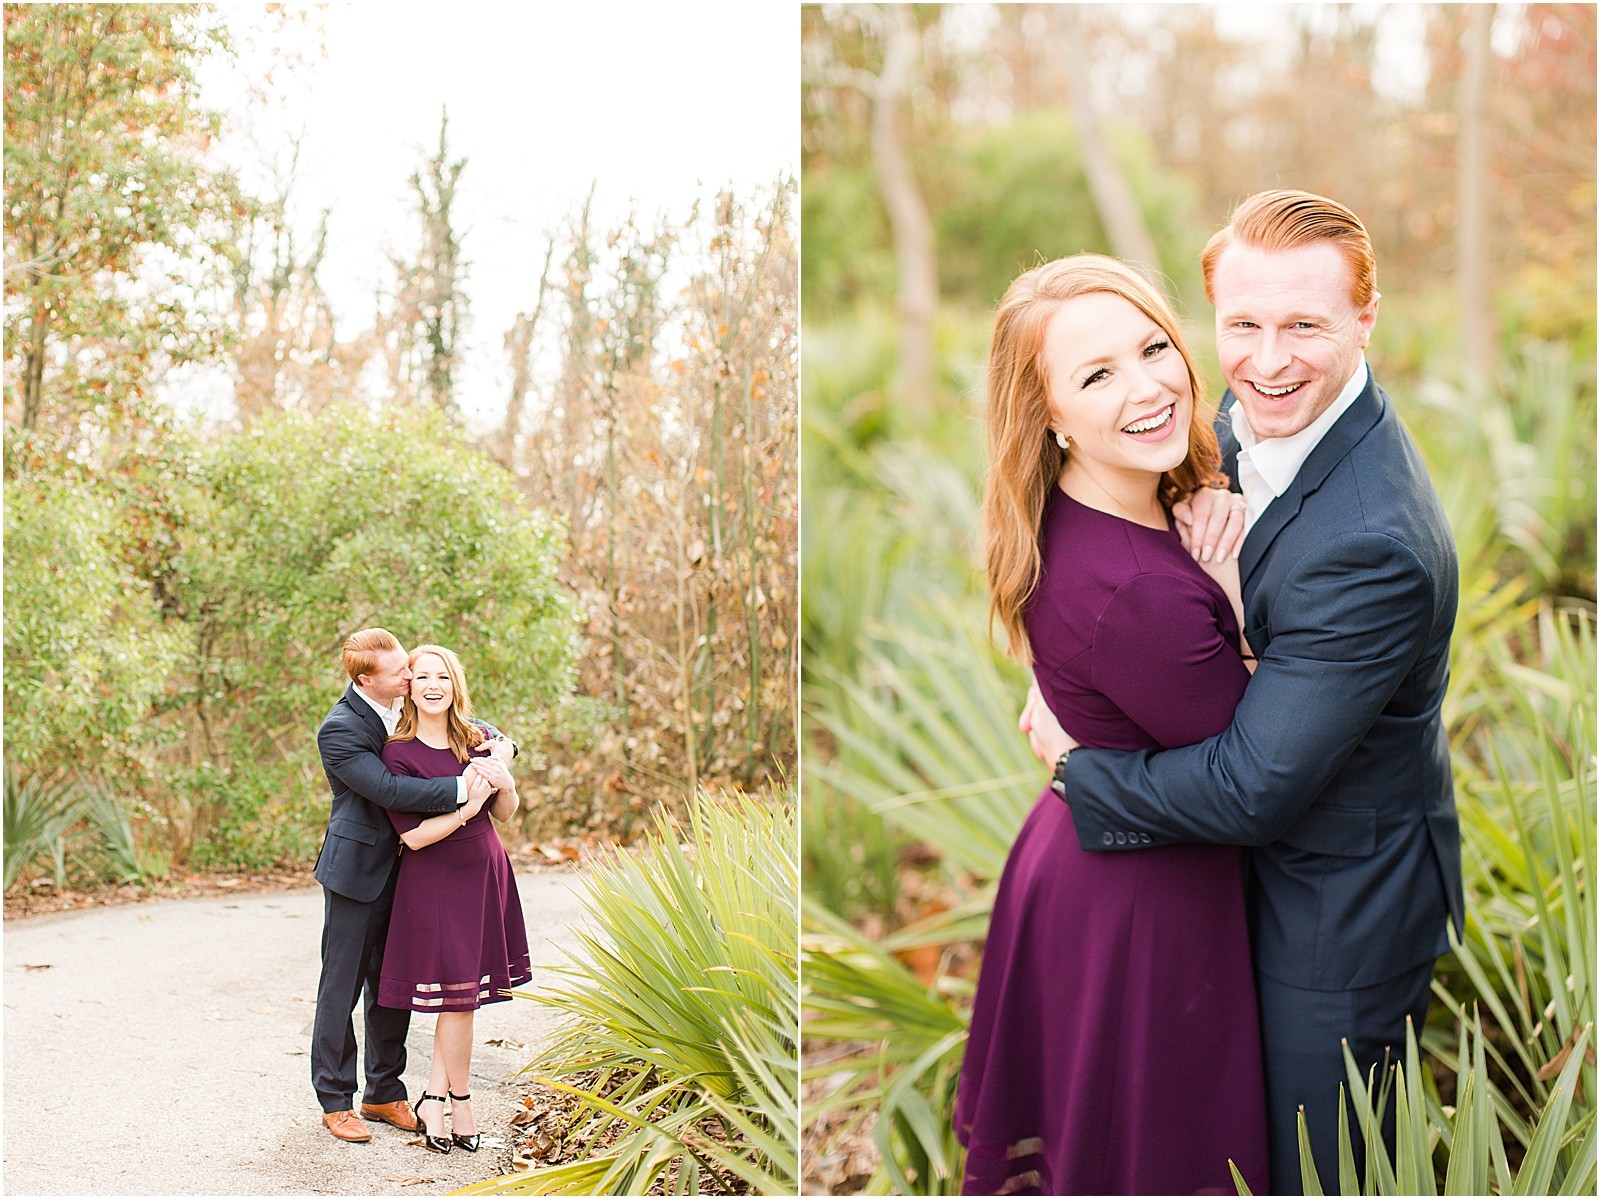 A Mesker Park Zoo Engagement Session | Jennah and Steve | Bret and Brandie Photography013.jpg